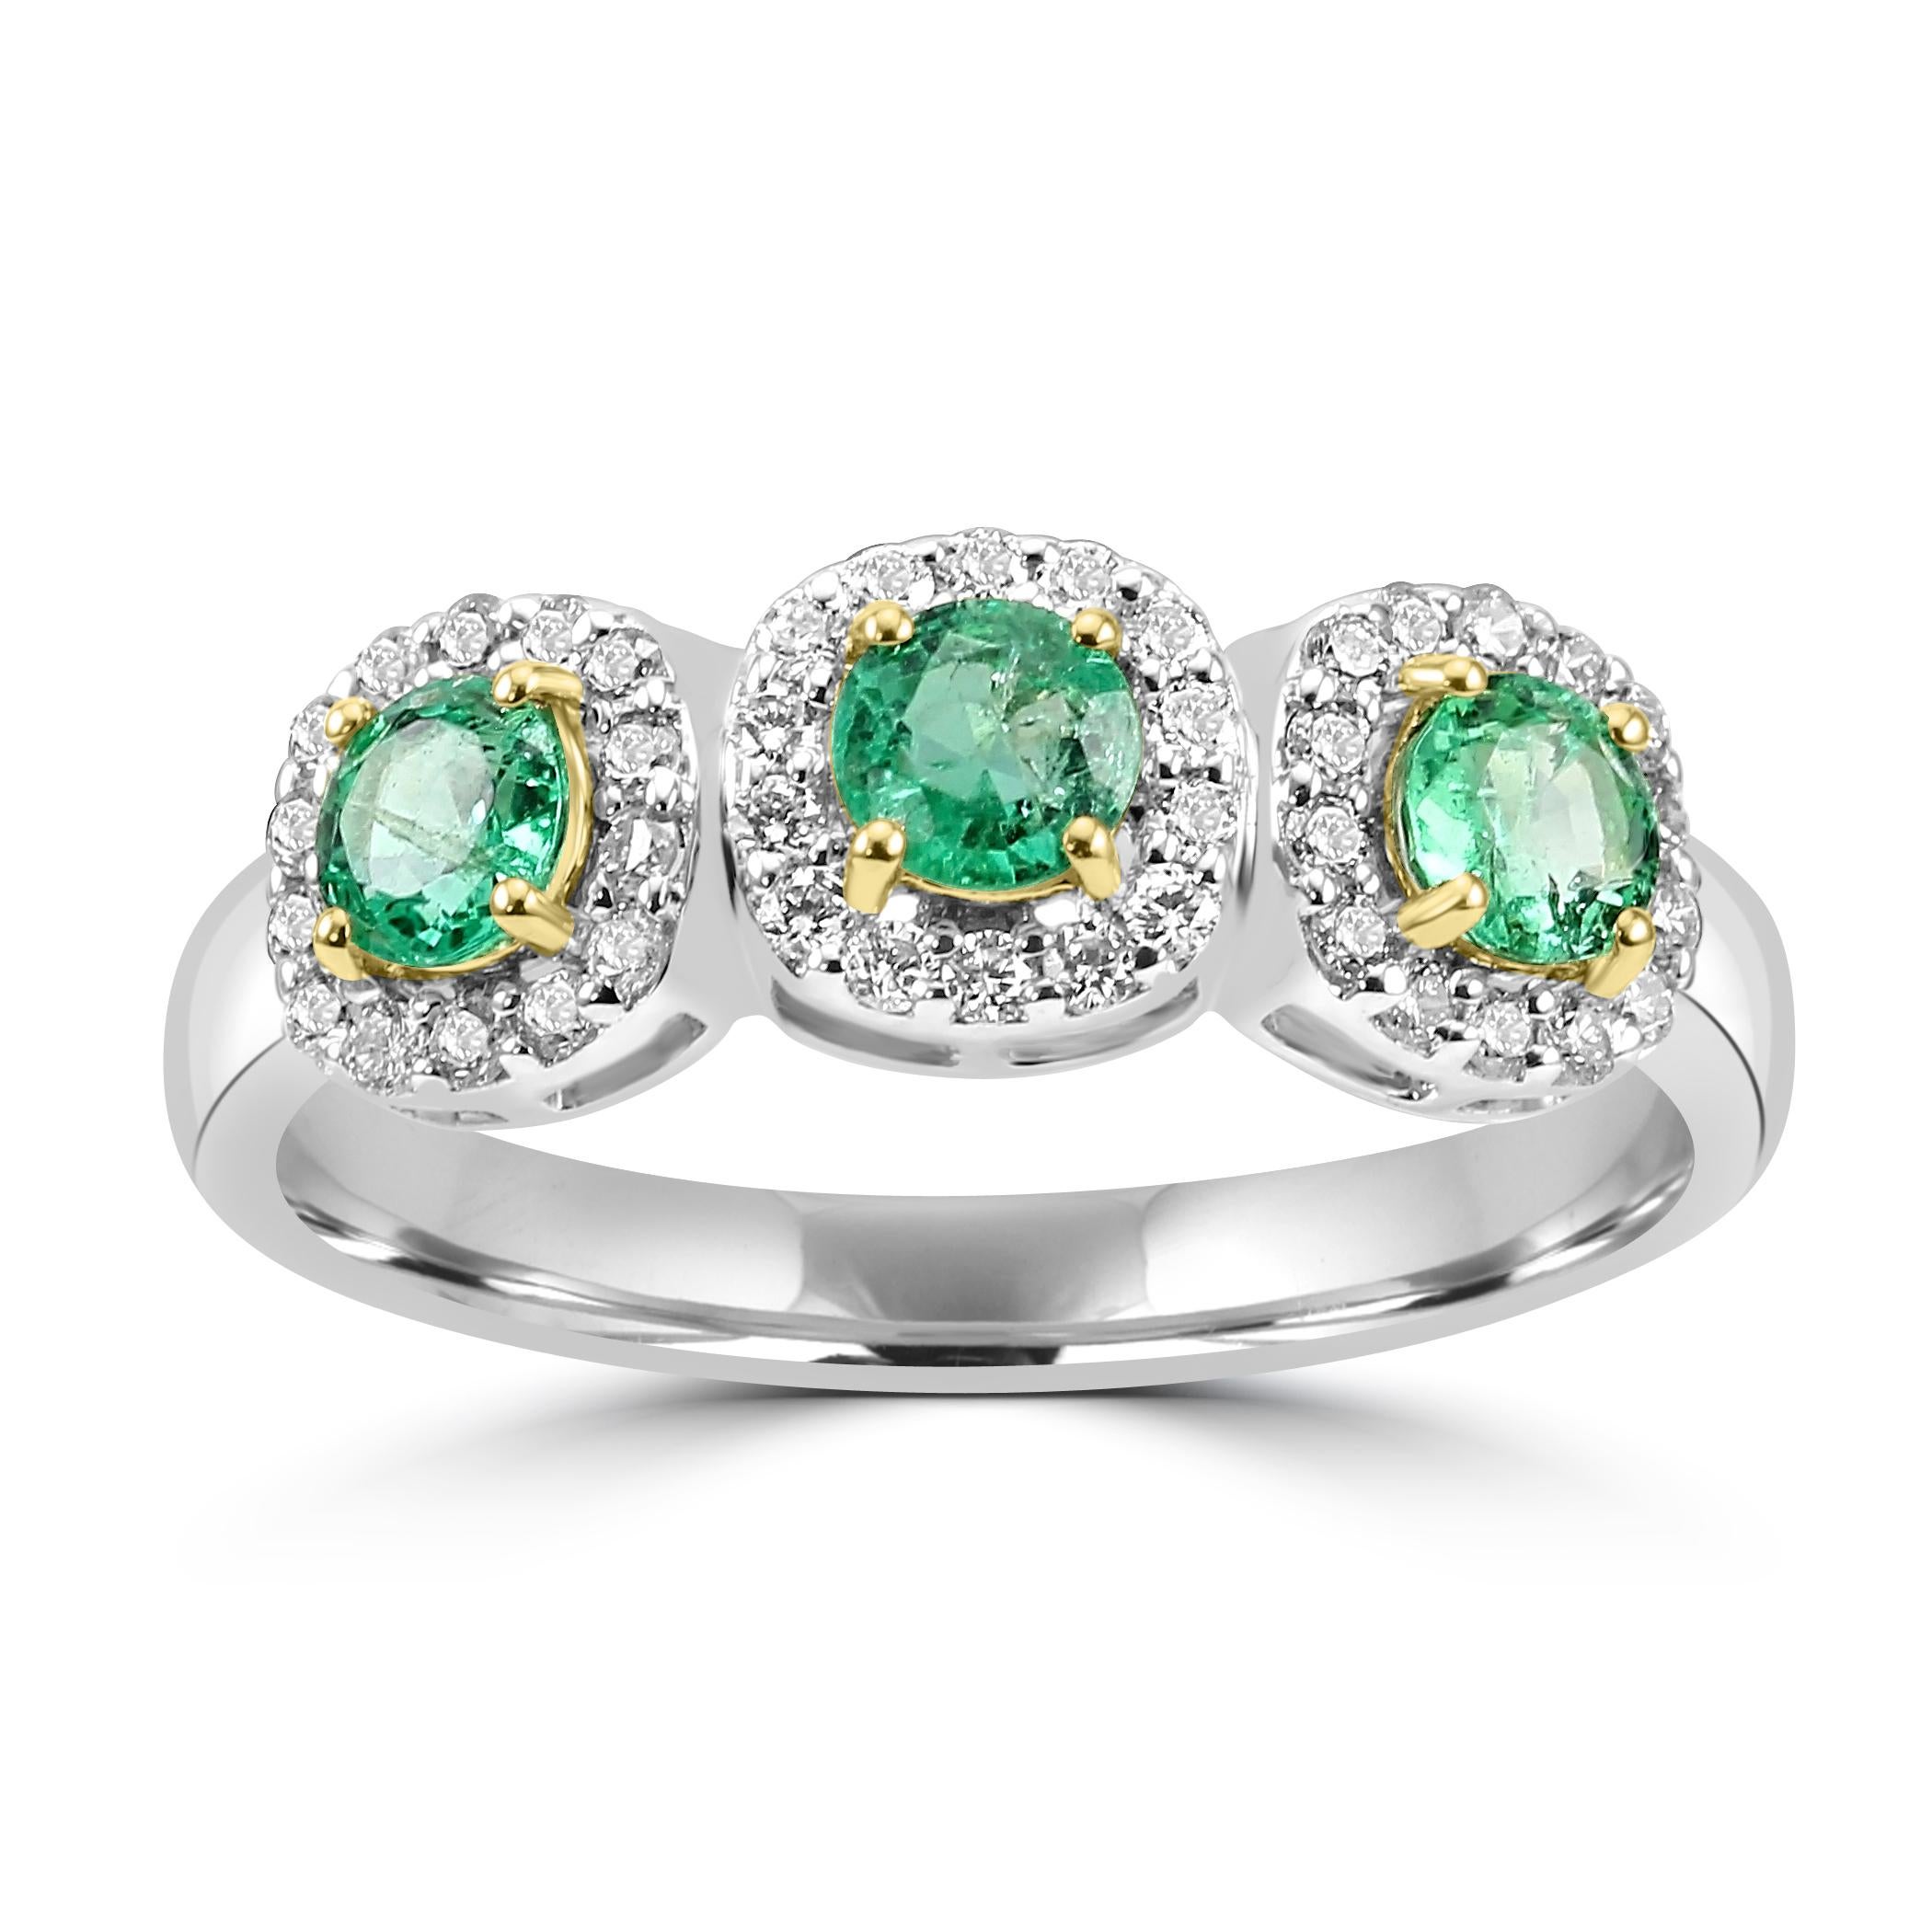 Behold our breathtaking 3-Stone engagement fashion ring, a symbol of everlasting love and timeless elegance.

This beautiful ring features three captivating Emerald Rounds, totaling to 0.52 carats, set in luxurious 18K White Gold. The nature-like